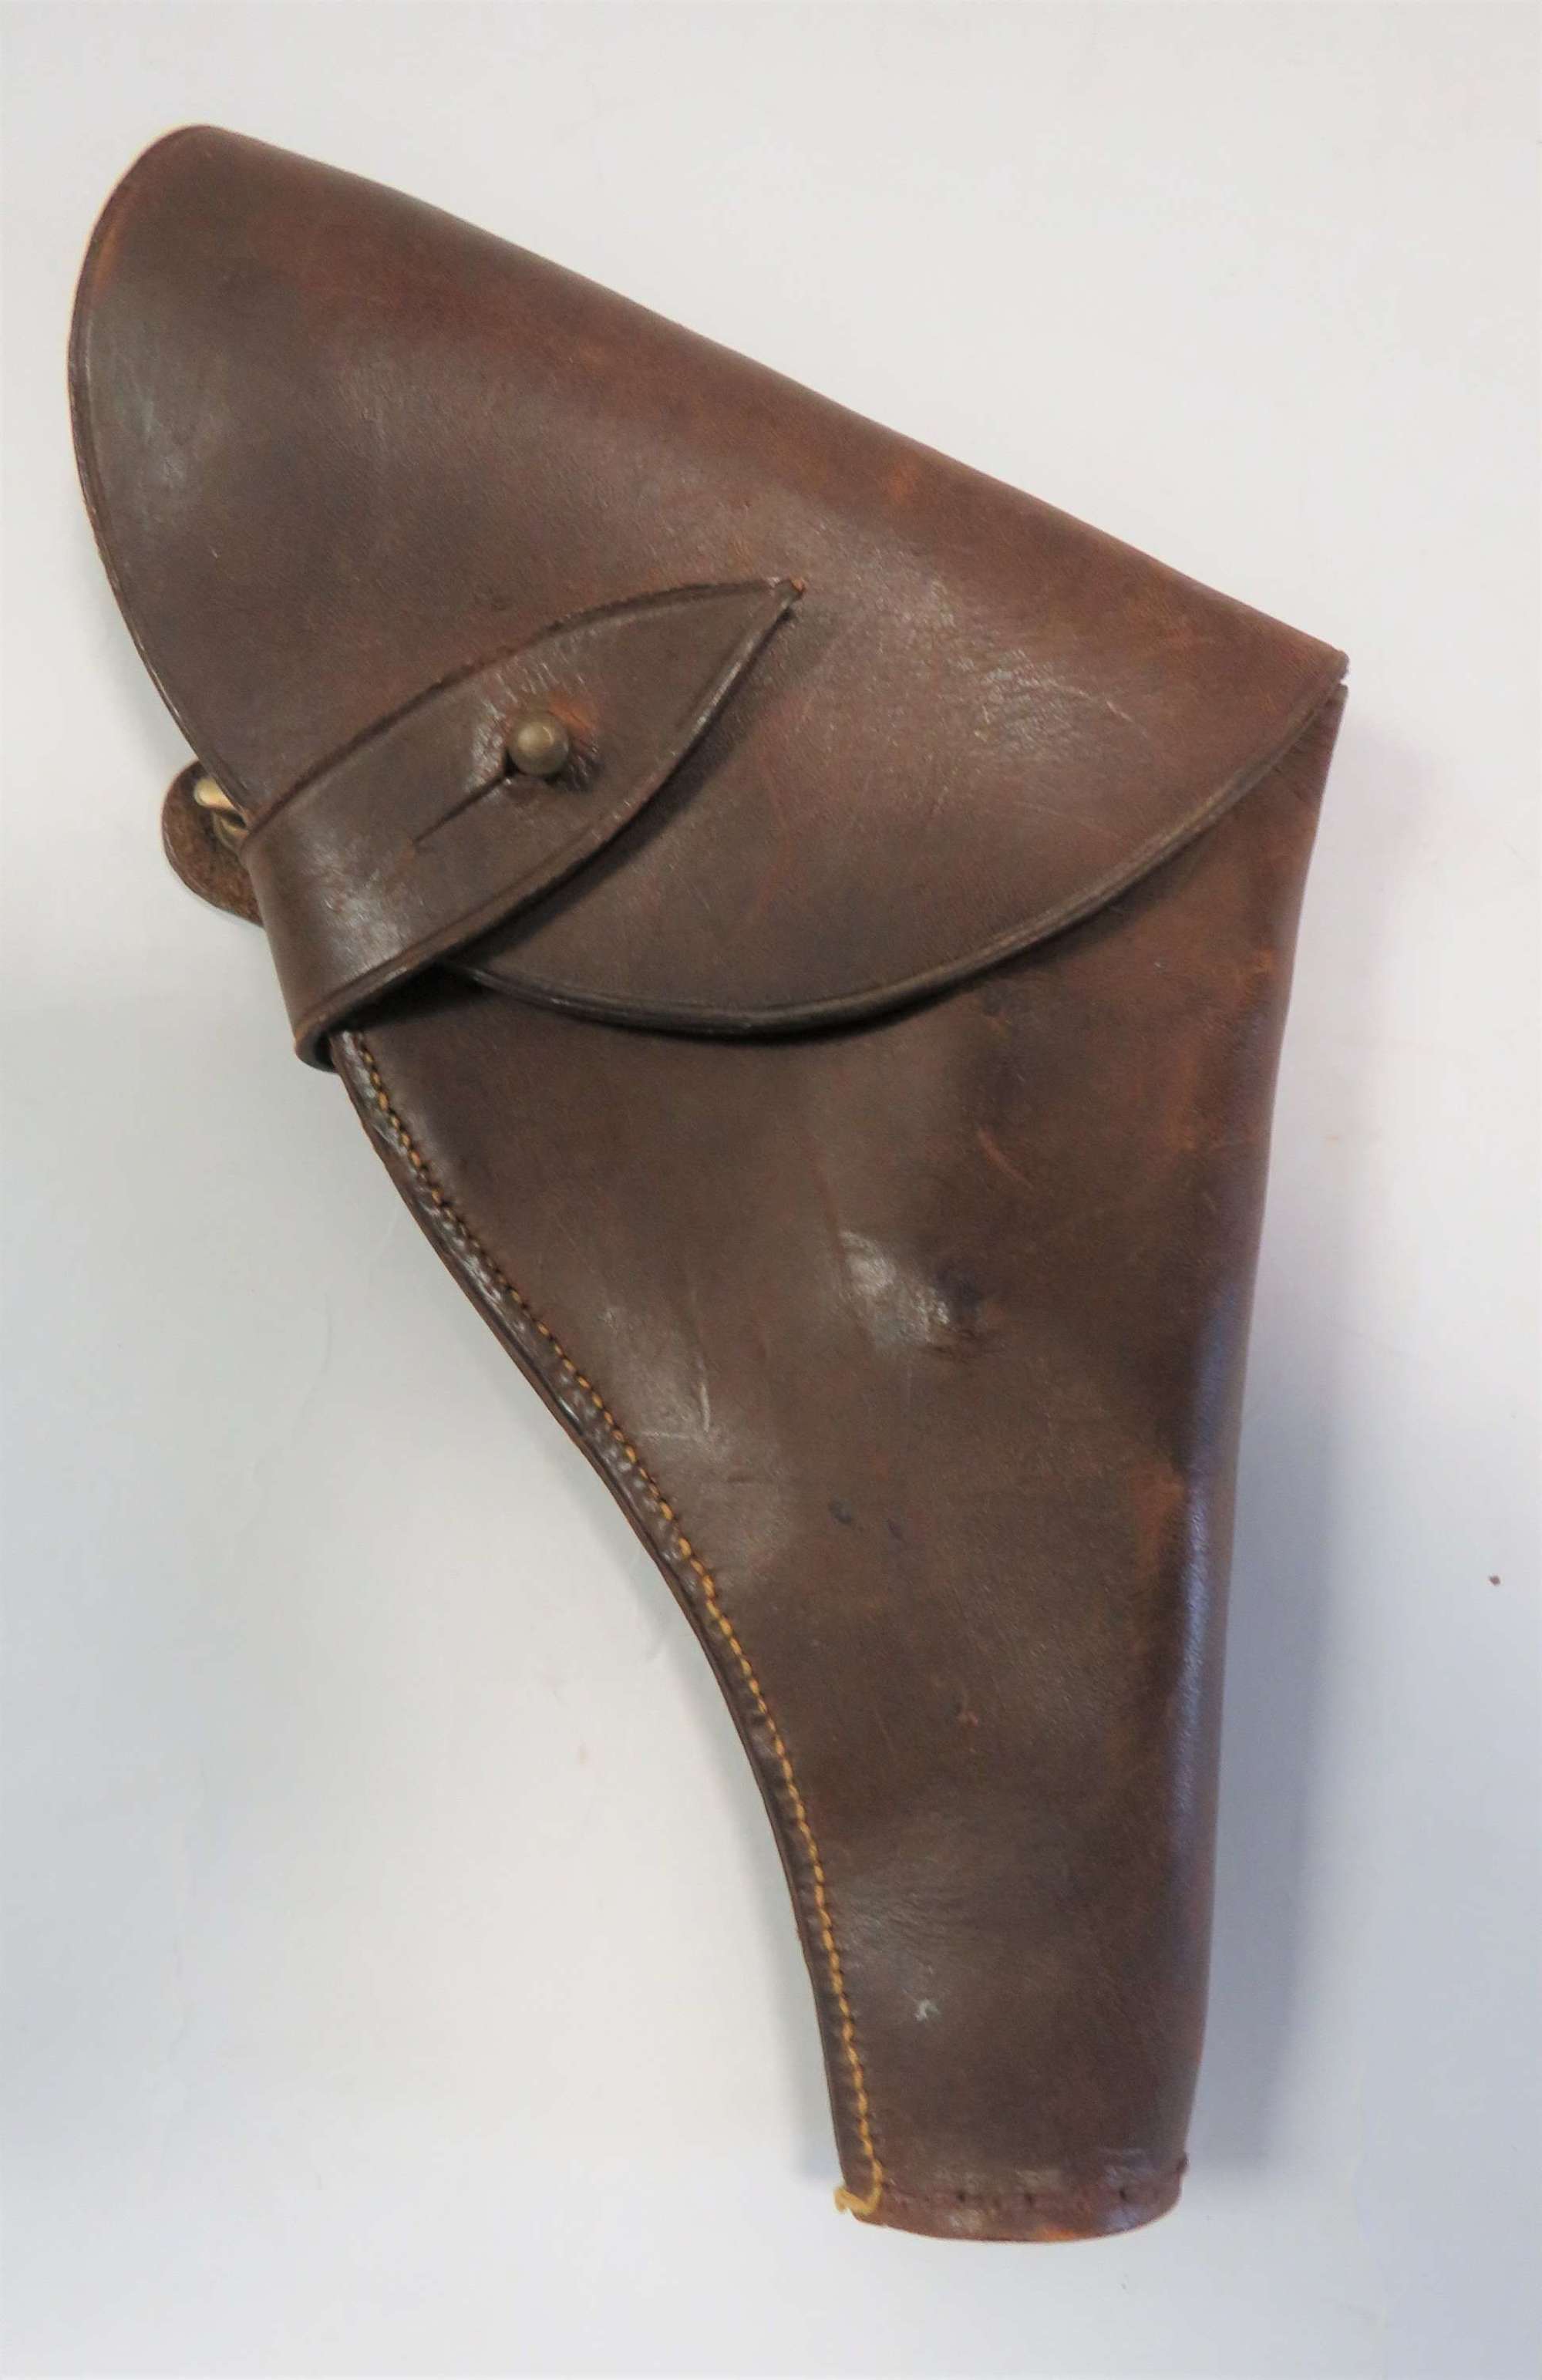 WW1 / WW2 Officers Leather Holster for a Mk 4 Webley Revolver